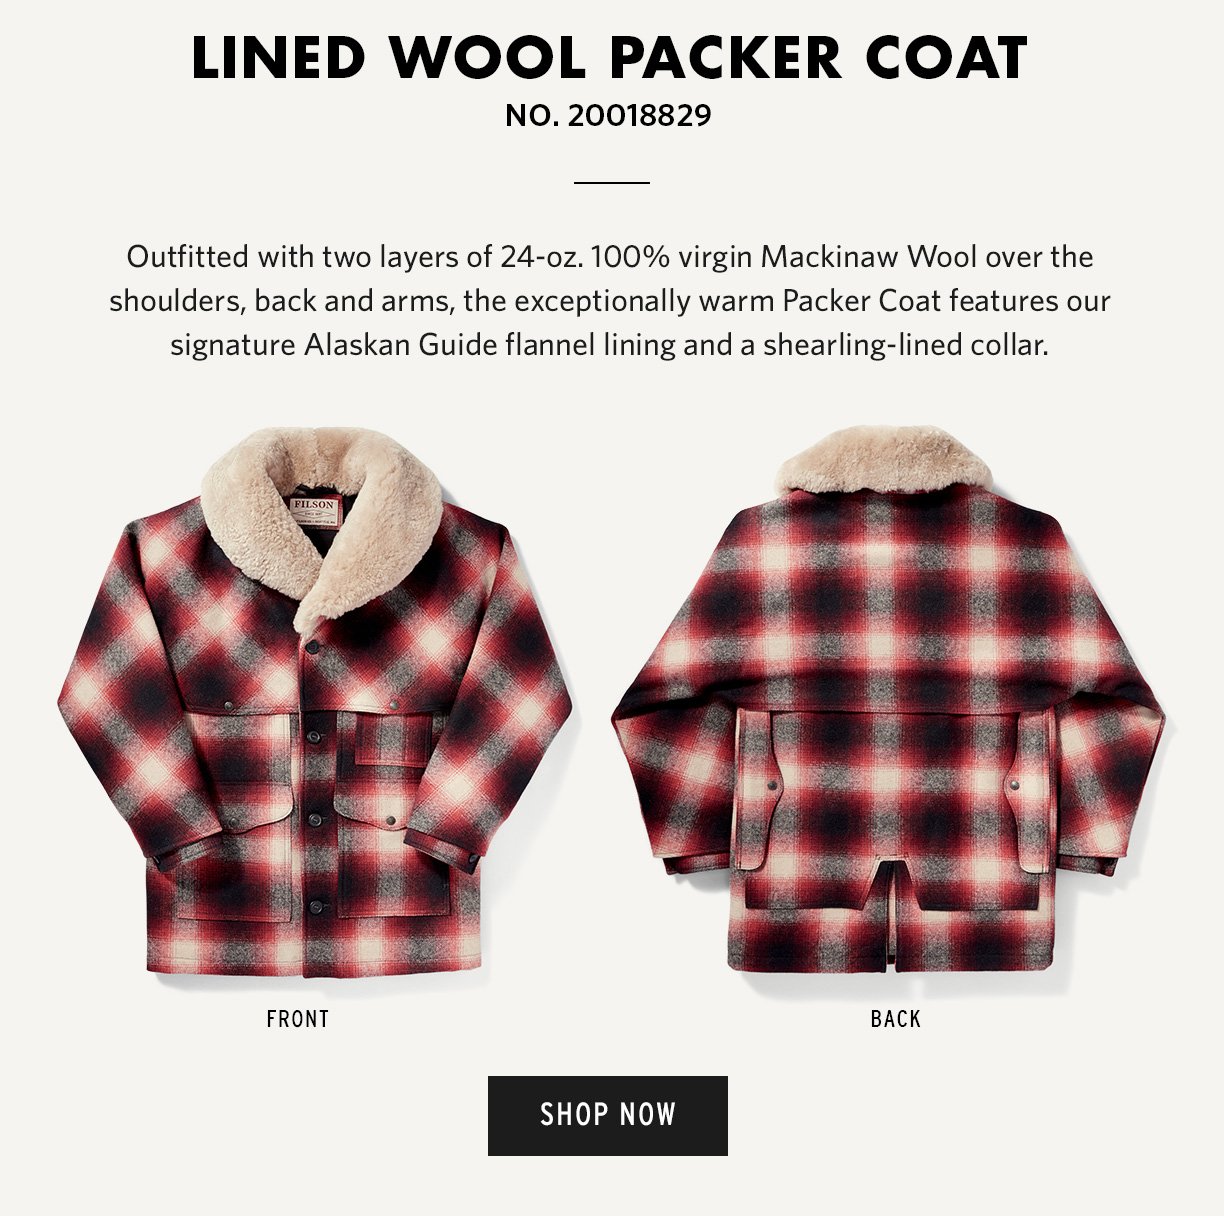 Filson: Back In Stock: The Lined Wool Packer Coat | Milled